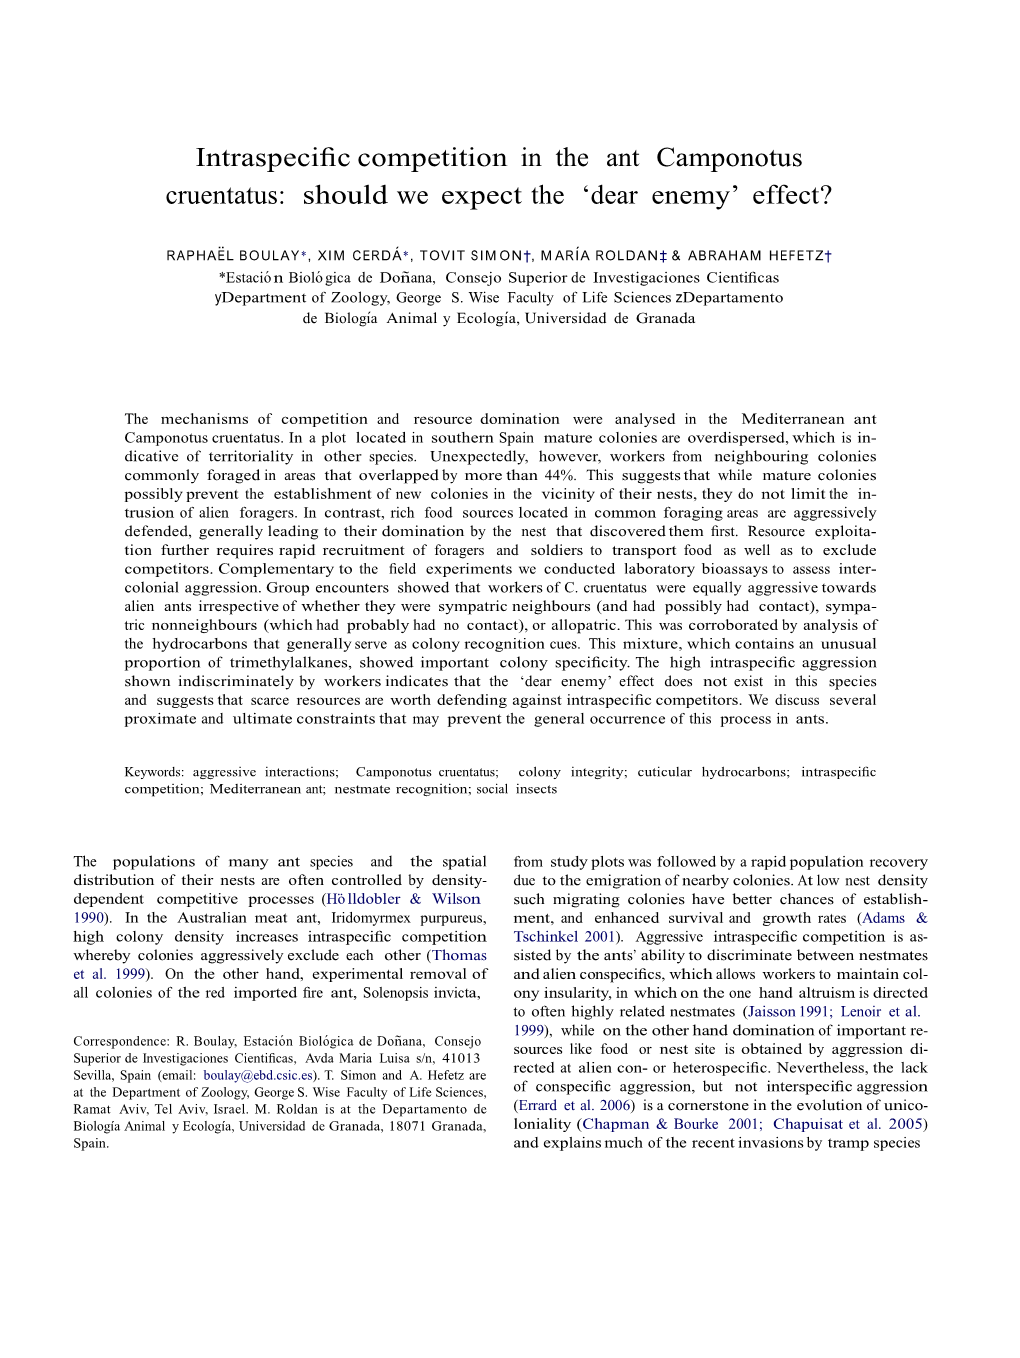 Intraspecific Competition in the Ant Camponotus Cruentatus: Should We